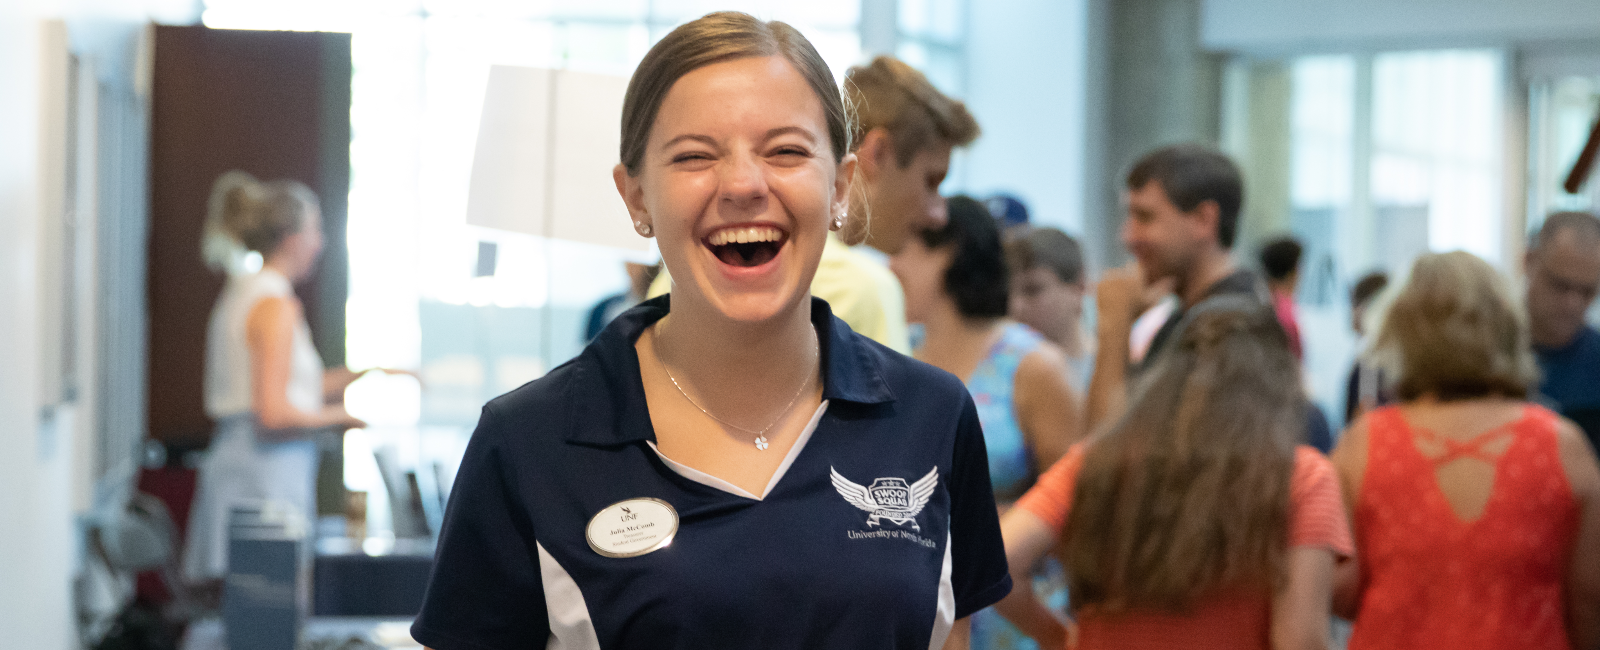 Female student in UNF Swoop Squad polo smiling big at the camera